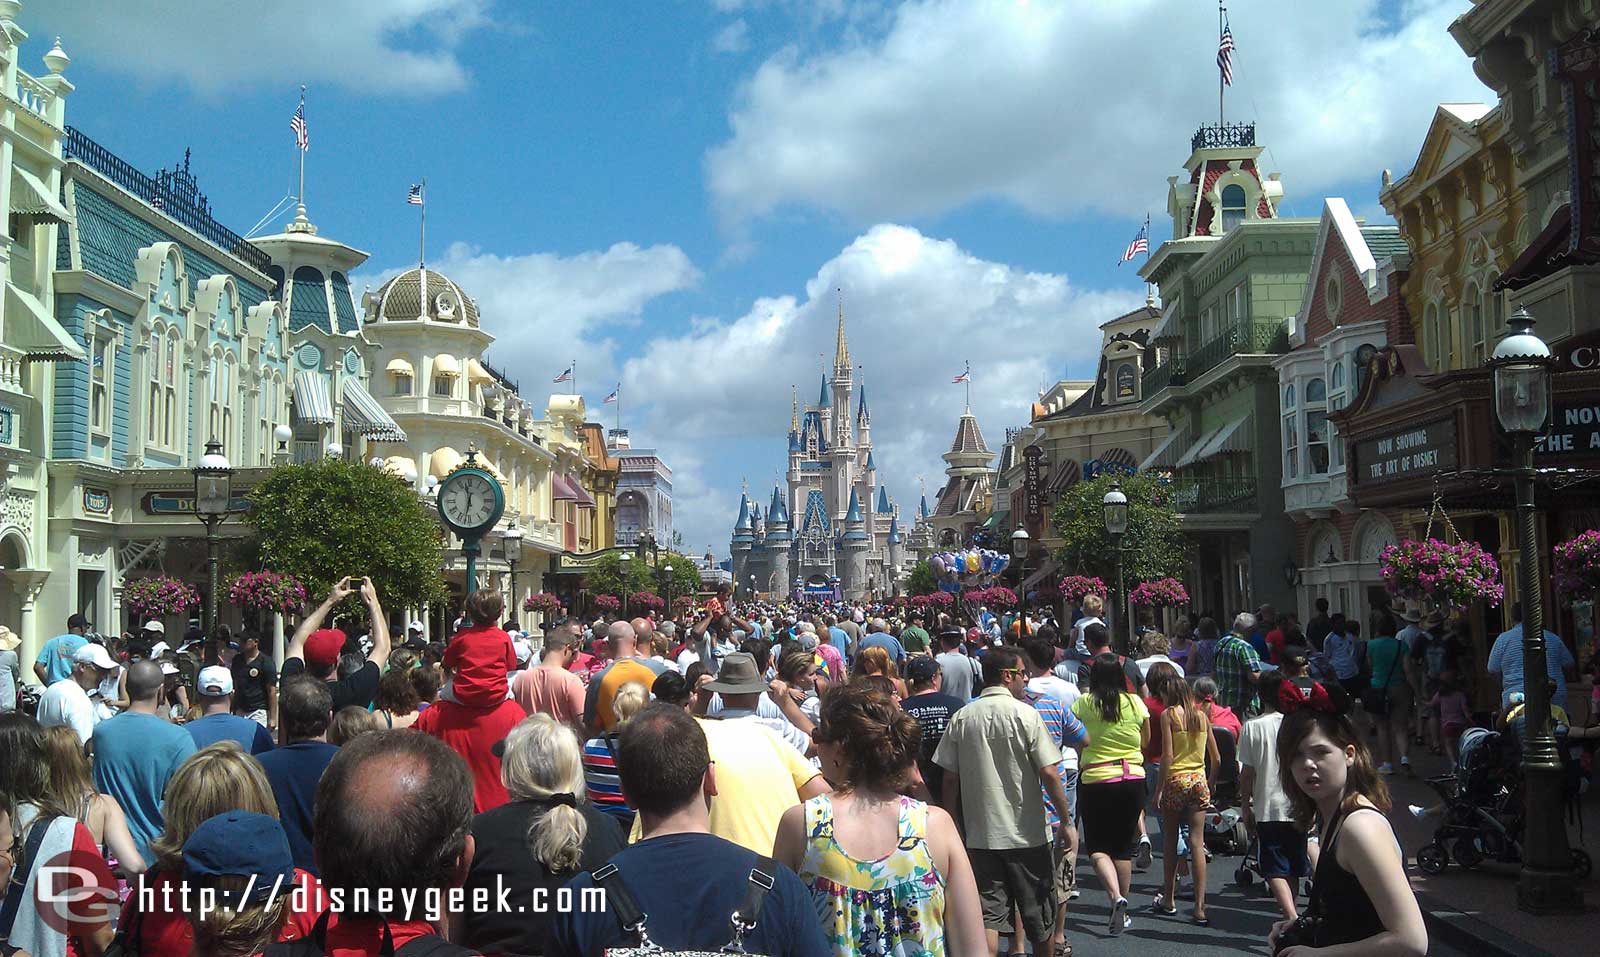 Main Street is busy this morning